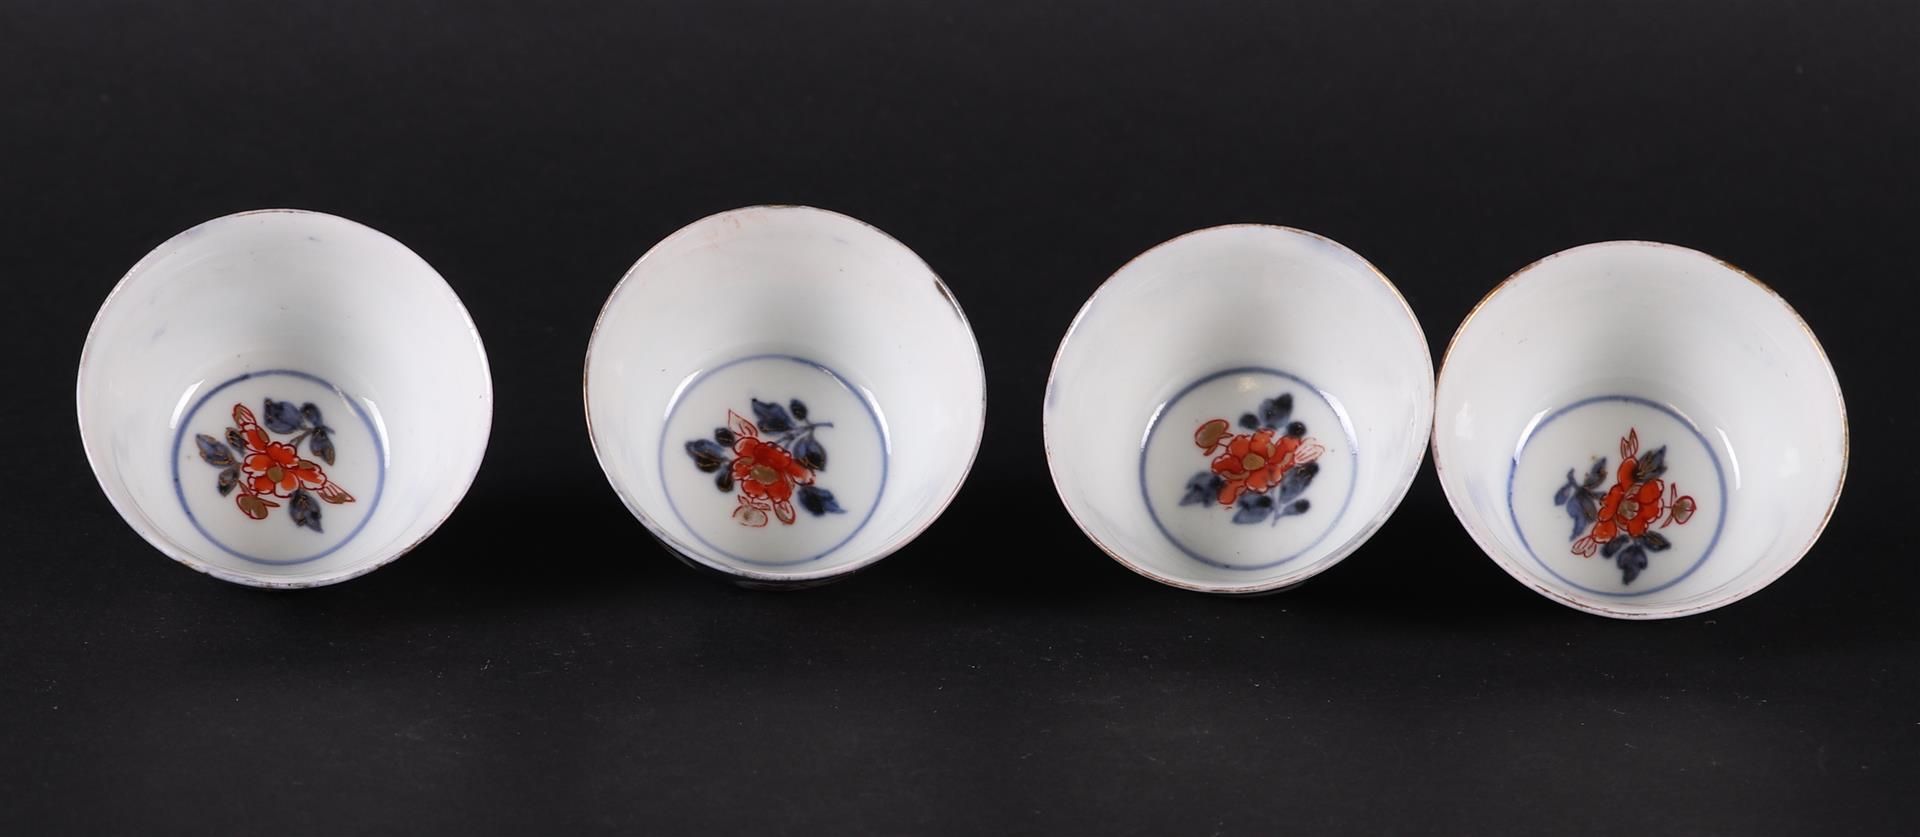 Four porcelain Imari bowls with floral decor in compartments. China/Japan, 18th century. - Image 2 of 3